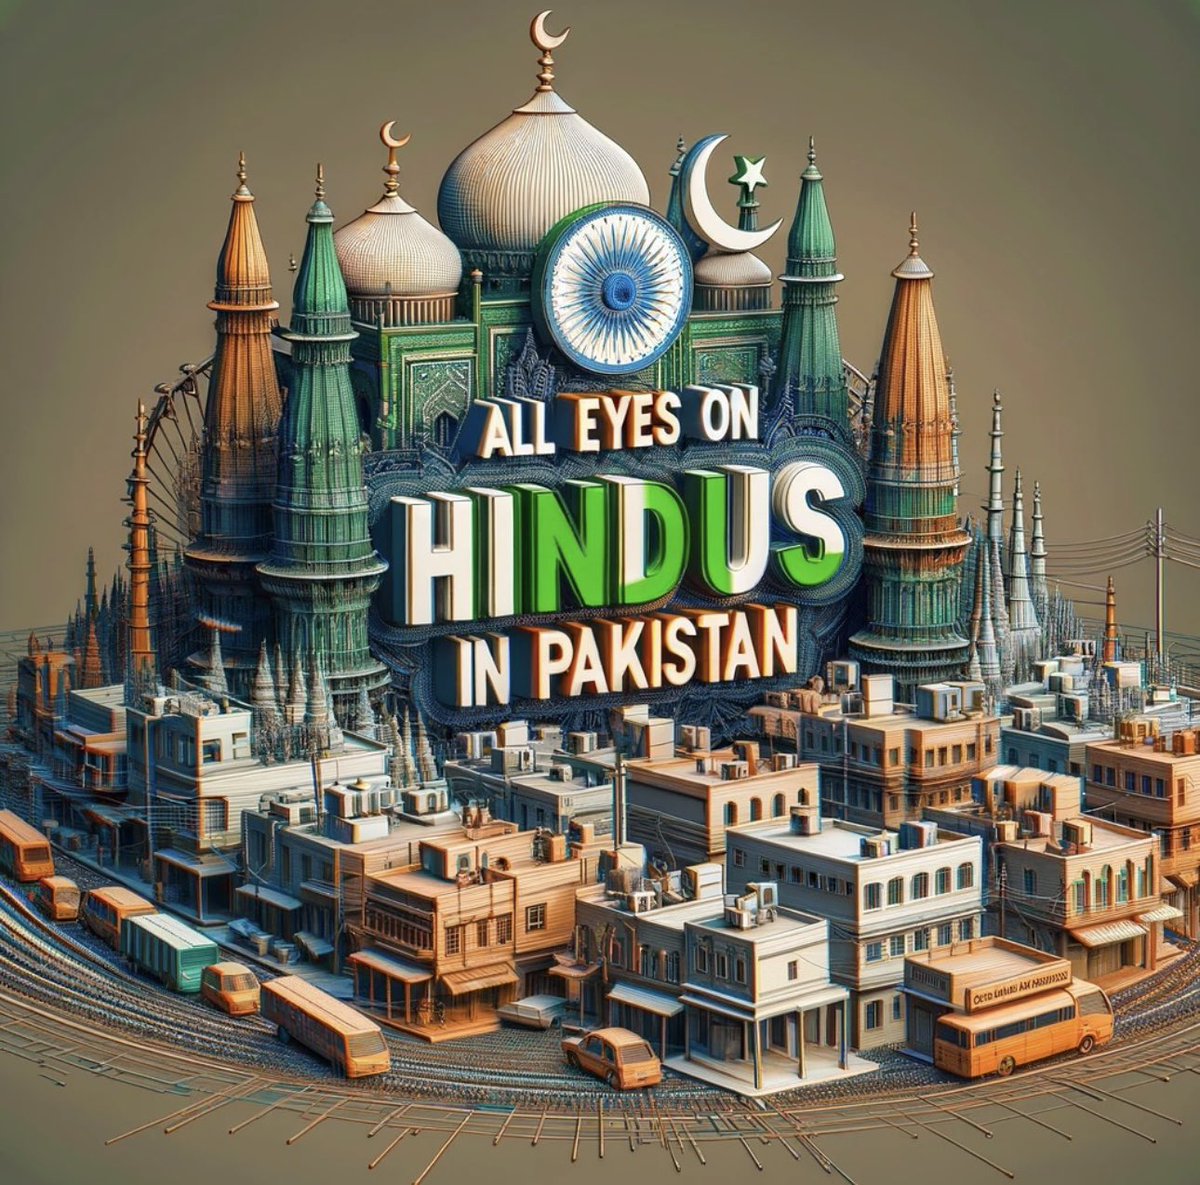 ALL EYES ON HINDUS IN PAKISTAN 🇵🇰✋🚫 If you are done showing sympathy with the terrorists of HAMAS, Kindly post just a little bit about Hindus in Pakistan as well. Thank you